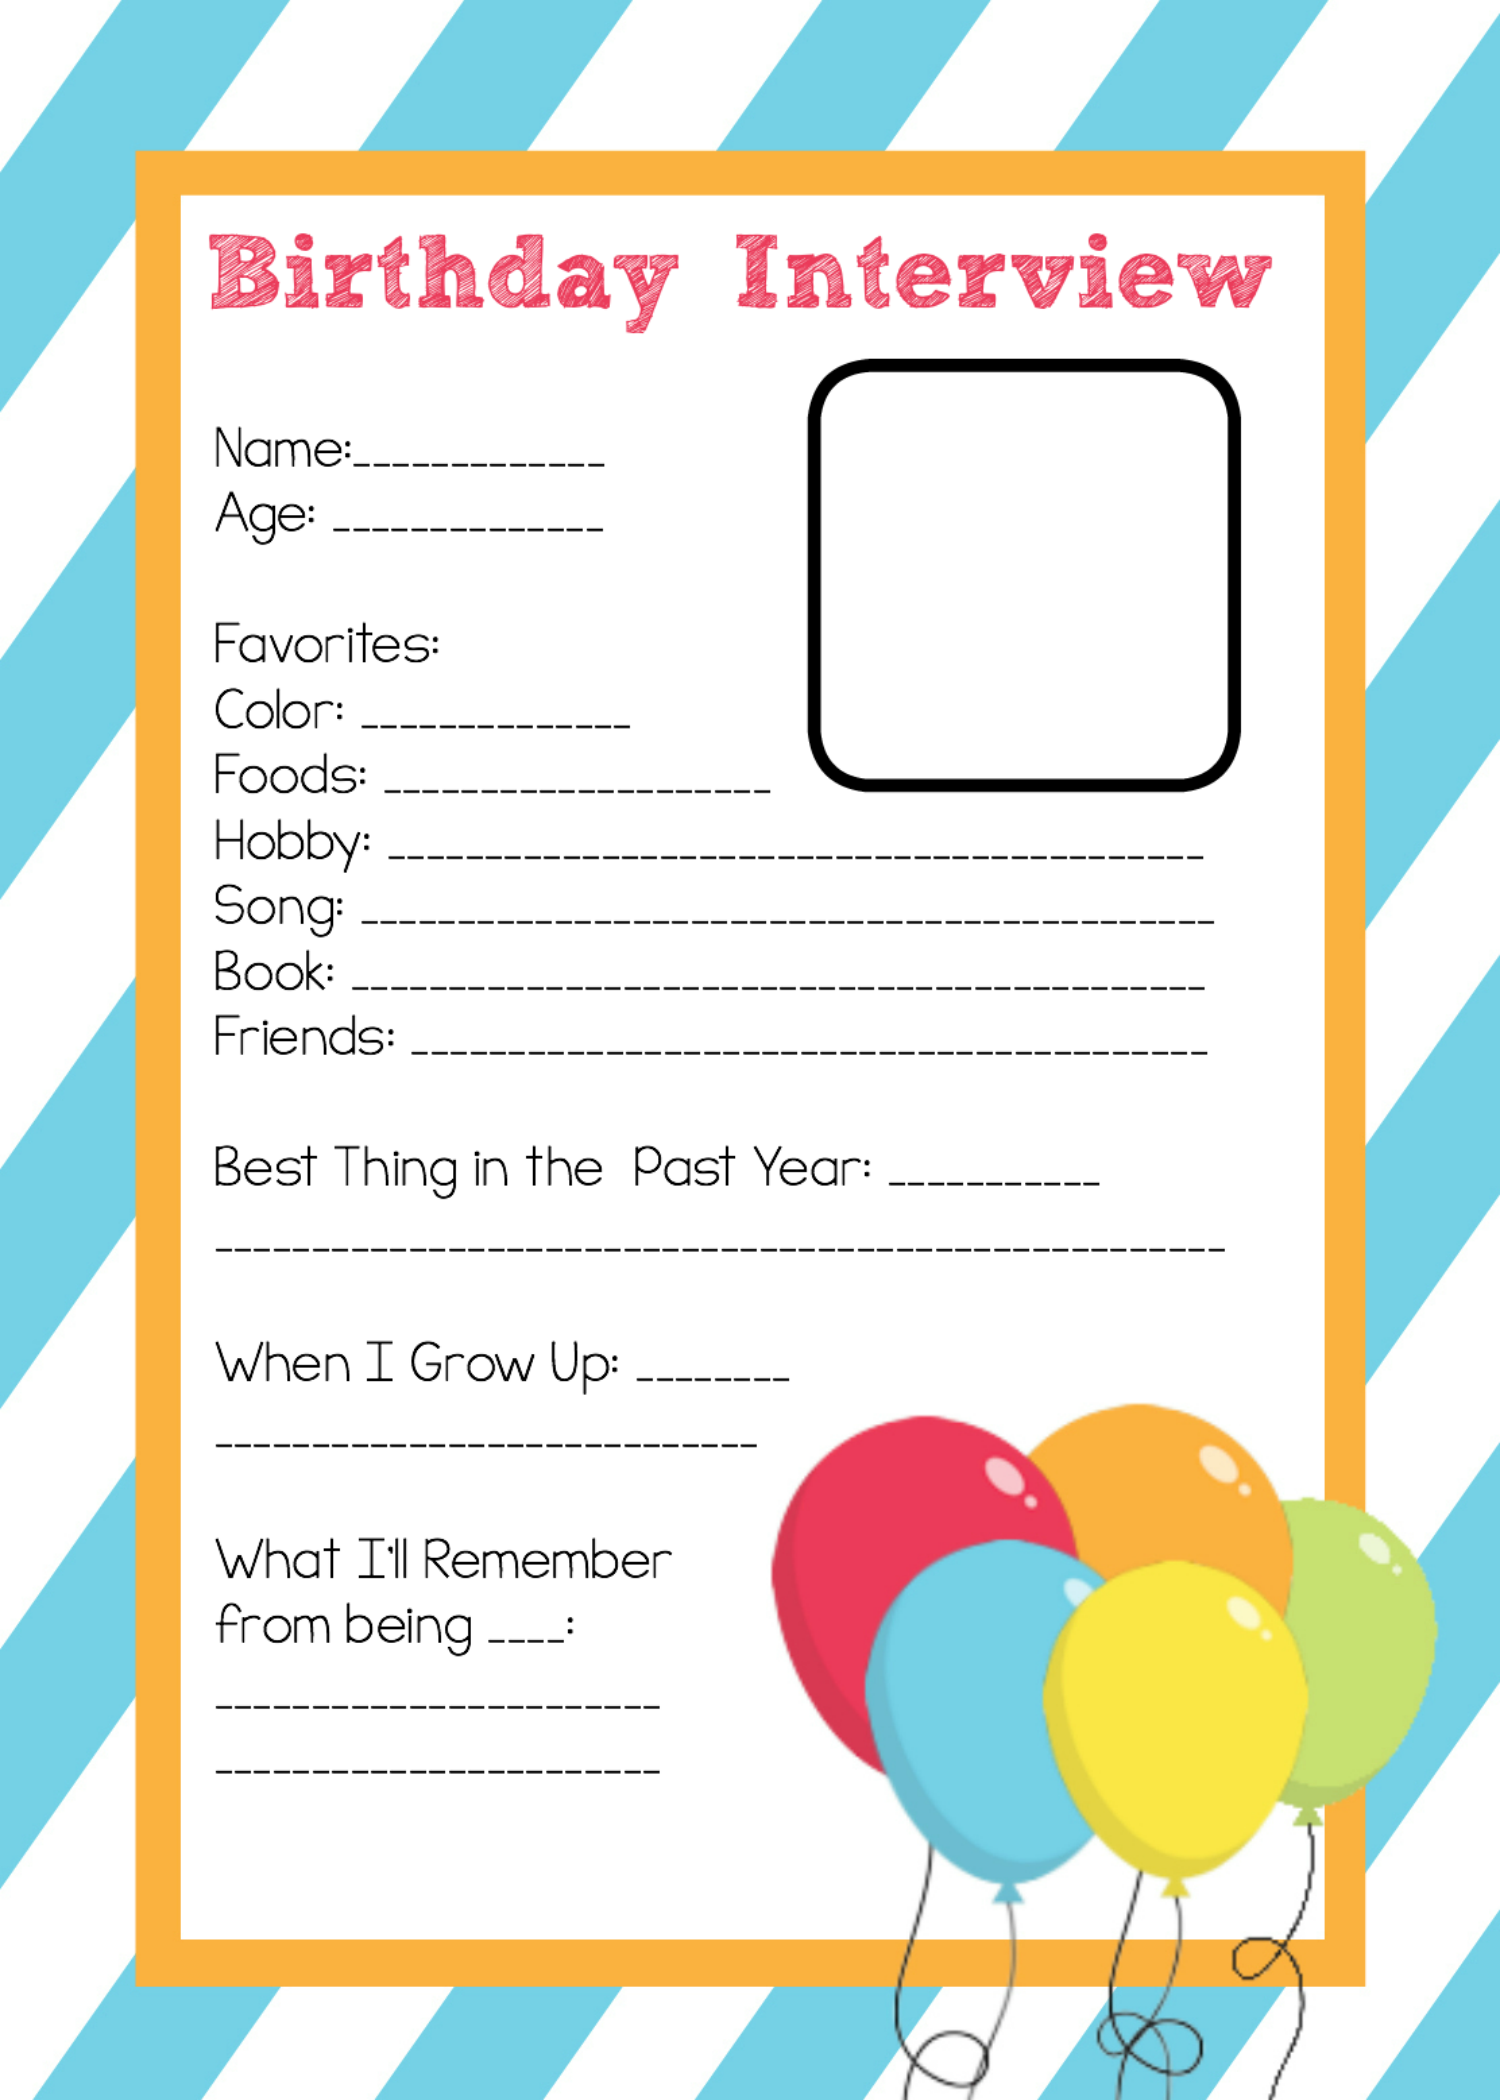 Free Printable Birthday Interview Template